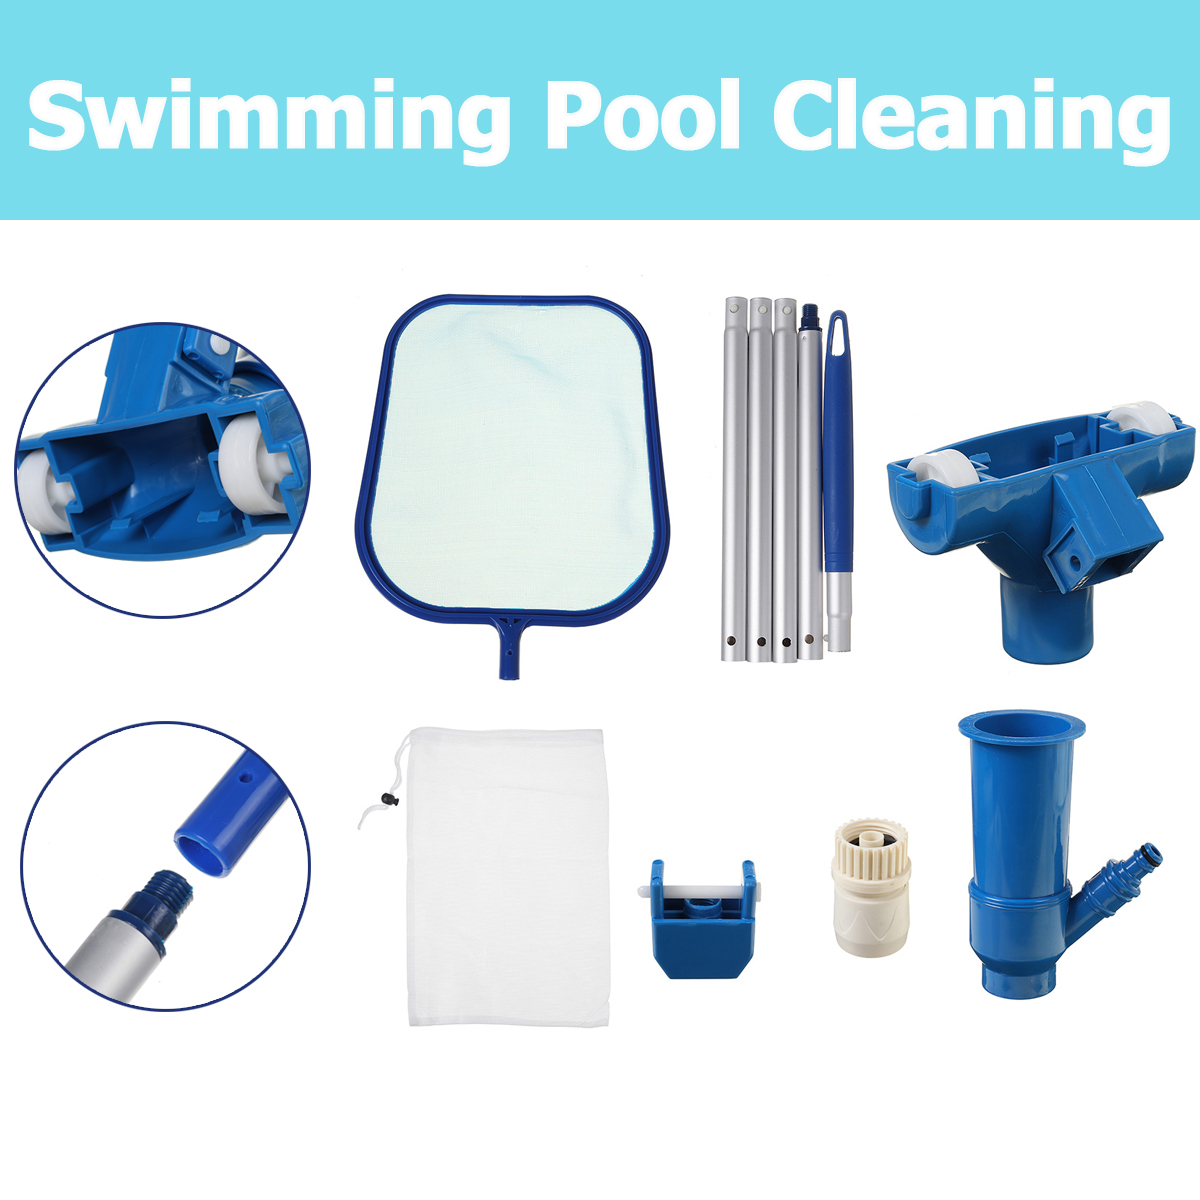 Pool-Water-Cleaning-Kit-Swimming-Vacuum-Cleaner-Leaf-Skimmer-Tool-Set-Removable-Tools-1723776-6